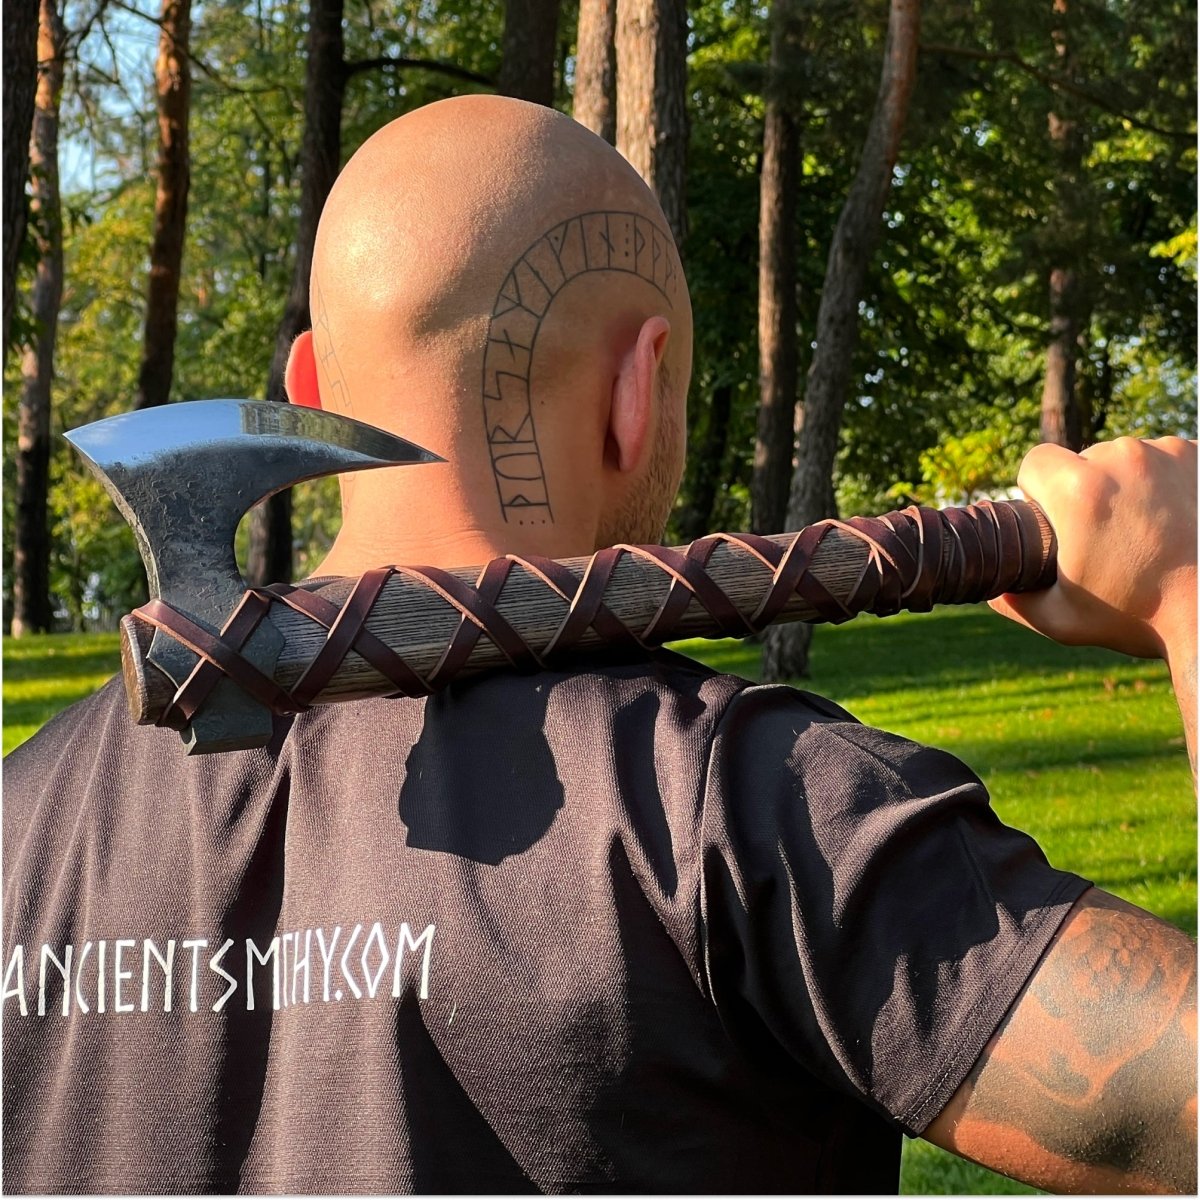 Nordic axe "Ares"(Functional version) from AncientSmithy